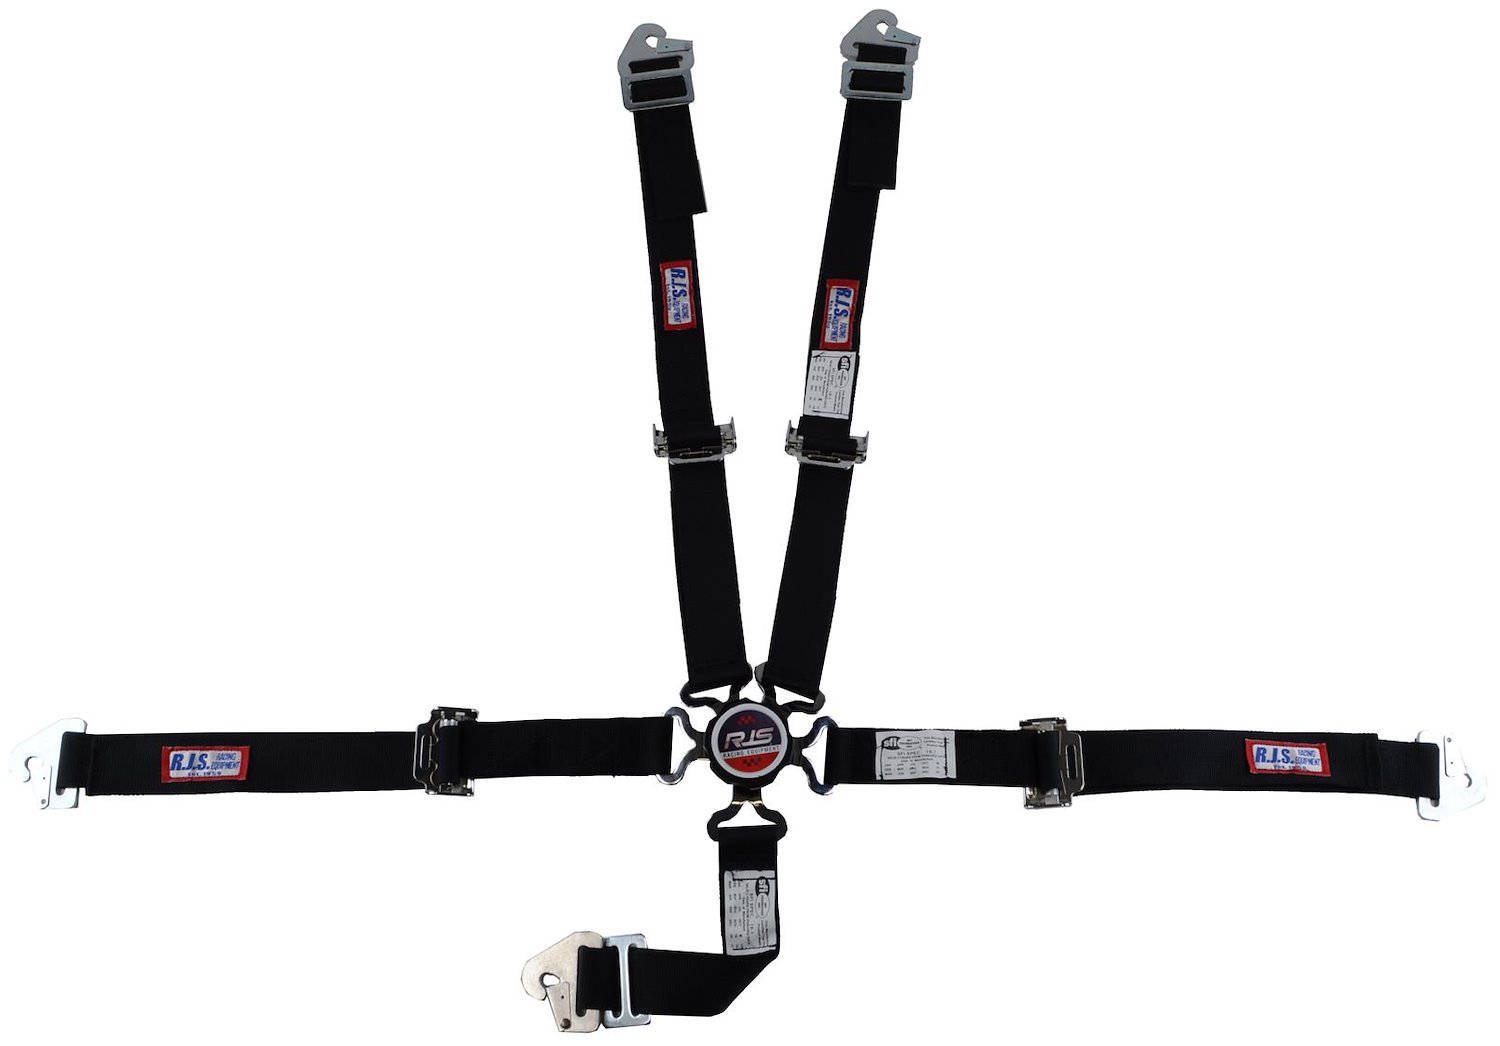 SFI 16.1 CAM-LOCK HARNESS 2 PULL DOWN Lap Belt 2 Shoulder Harness V ROLL BAR Mount 2 SINGLE Sub ALL SNAP ENDS YELLOW